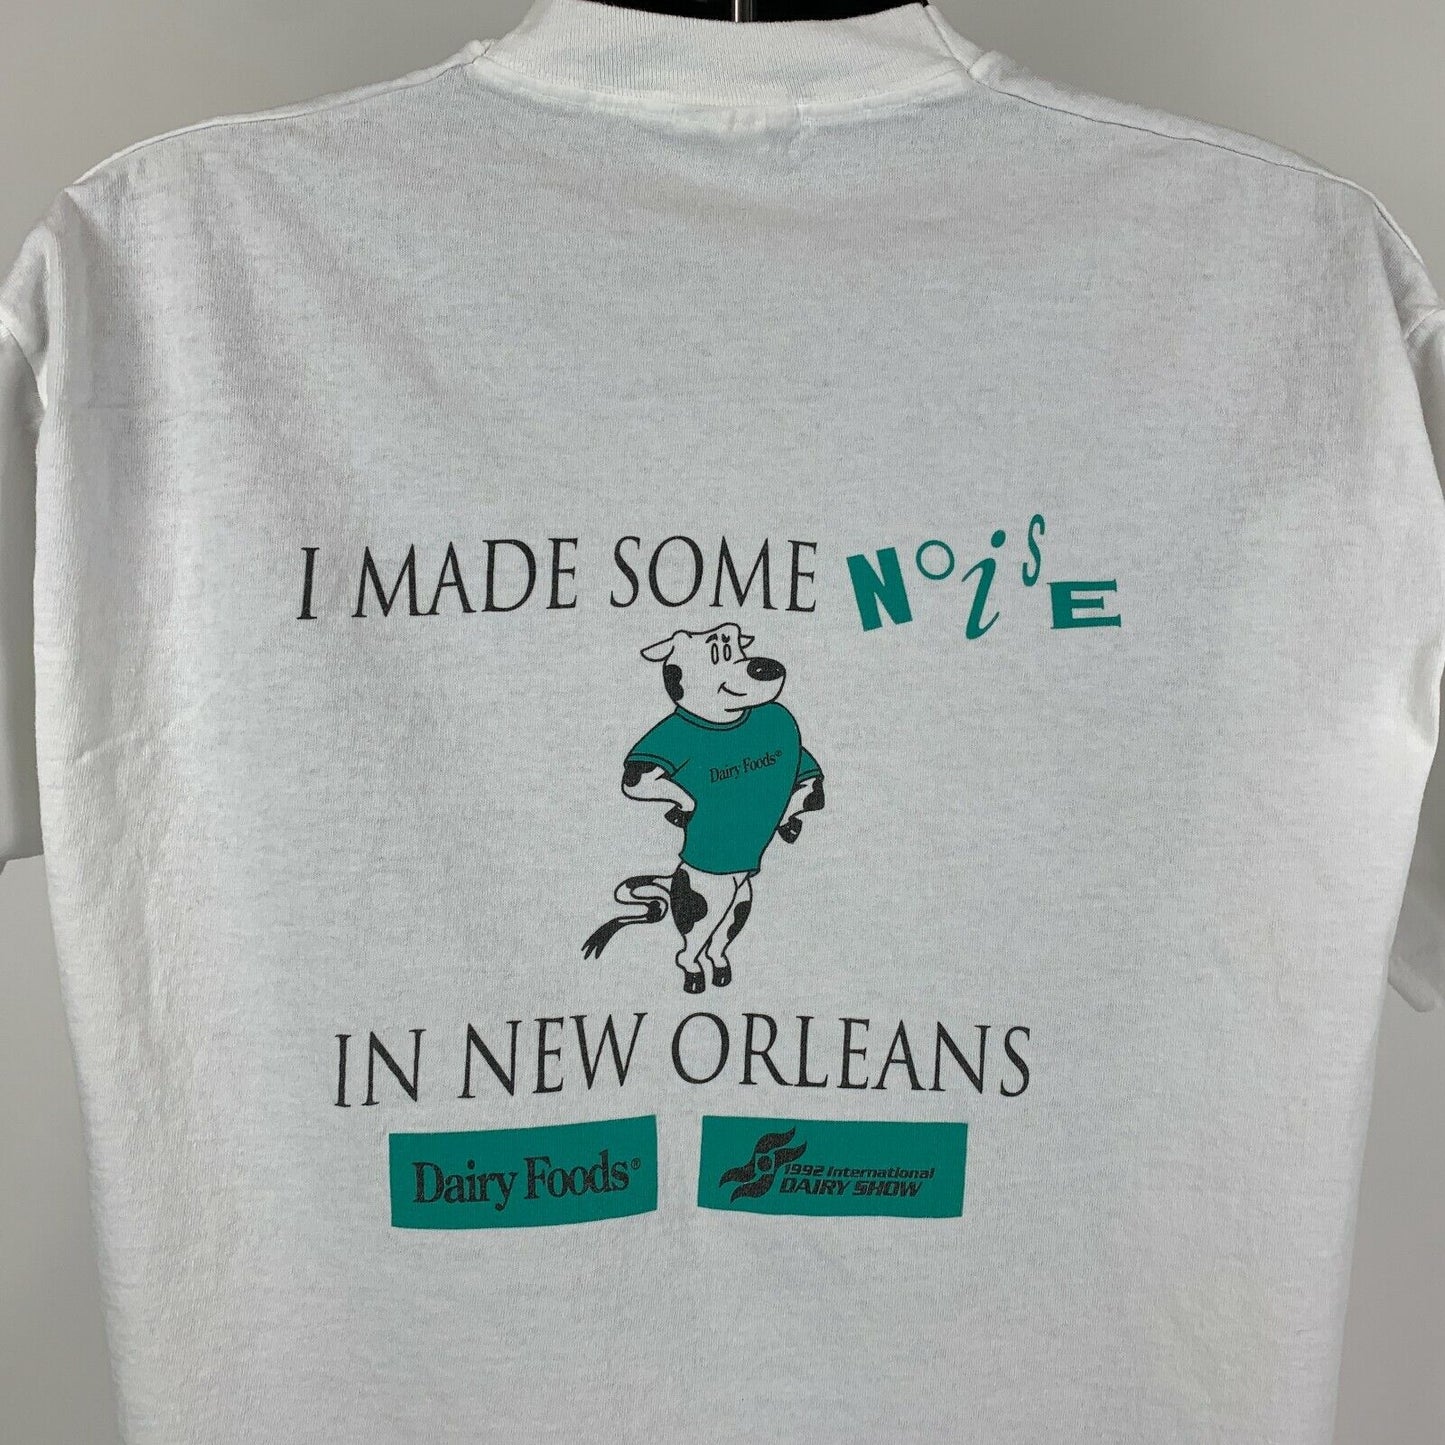 Dairy Foods Show Milk Cow Vintage 90s T Shirt X-Large New Orleans USA Mens White